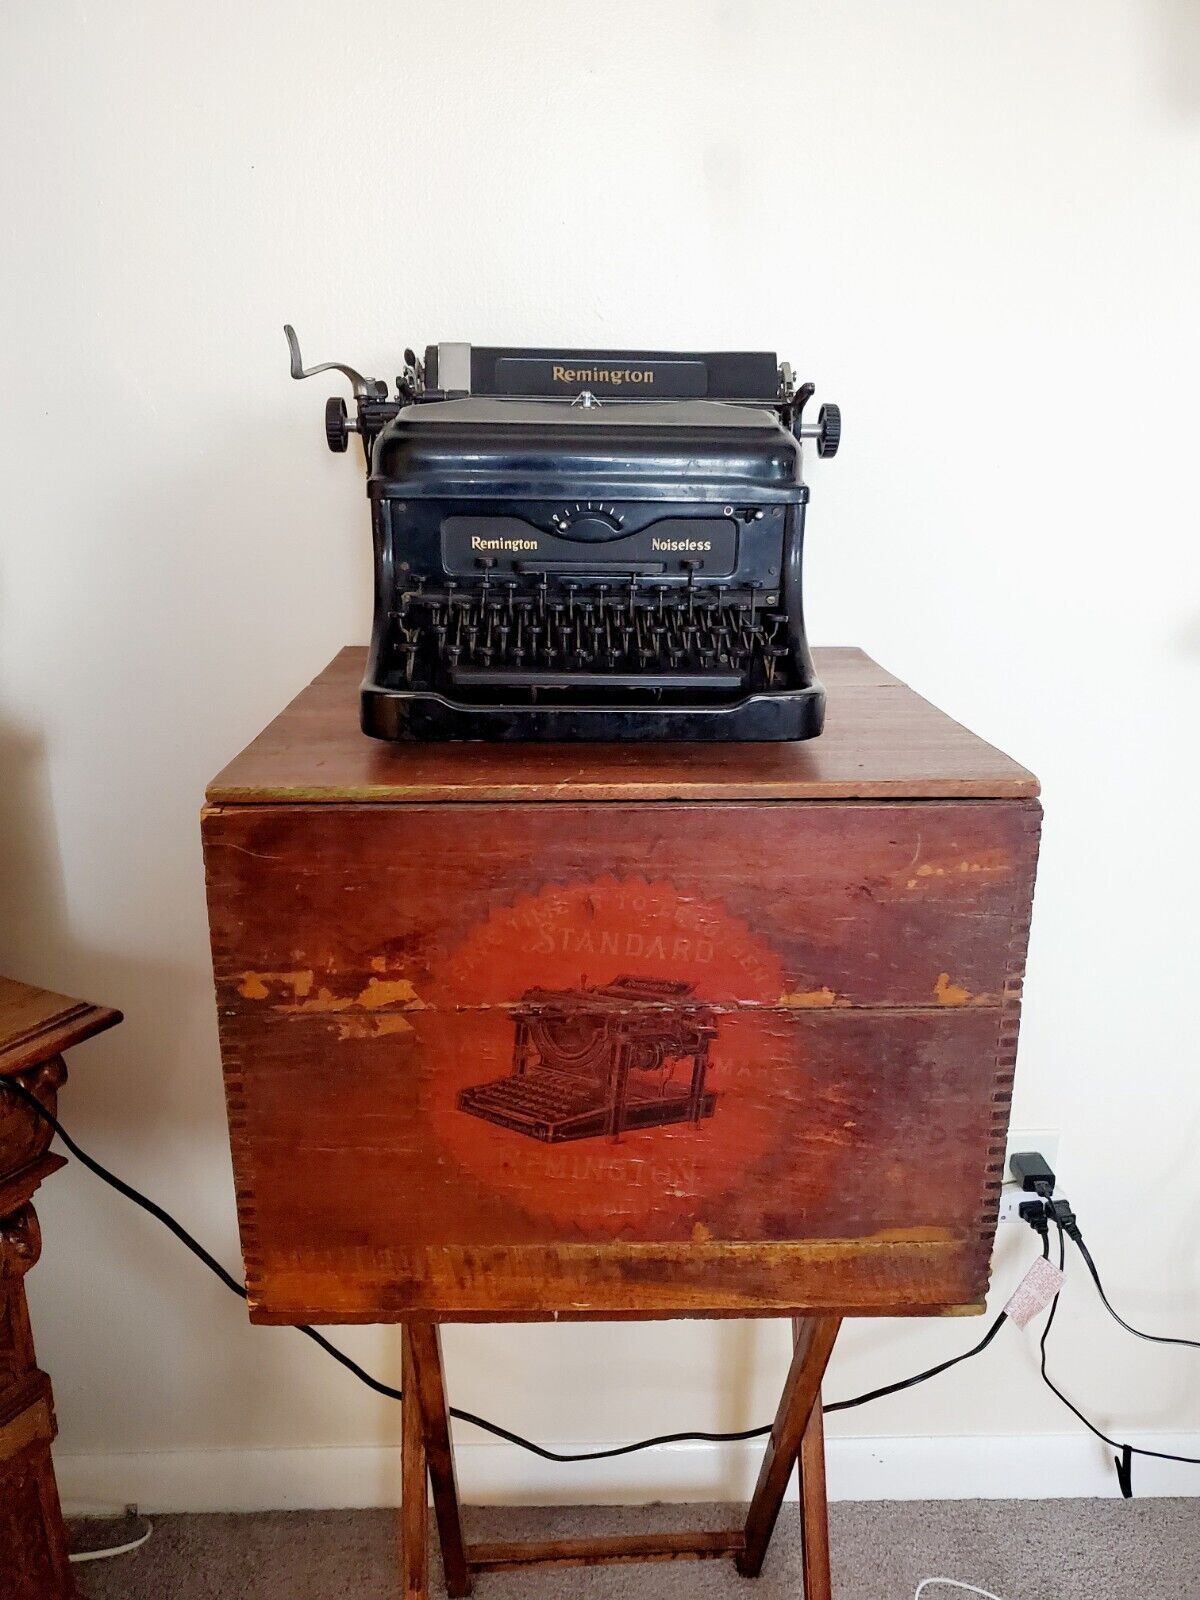 ANTIQUE 1930s REMINGTON NOISELESS MANUAL TYPEWRITER WITH SHIPPING CRATE